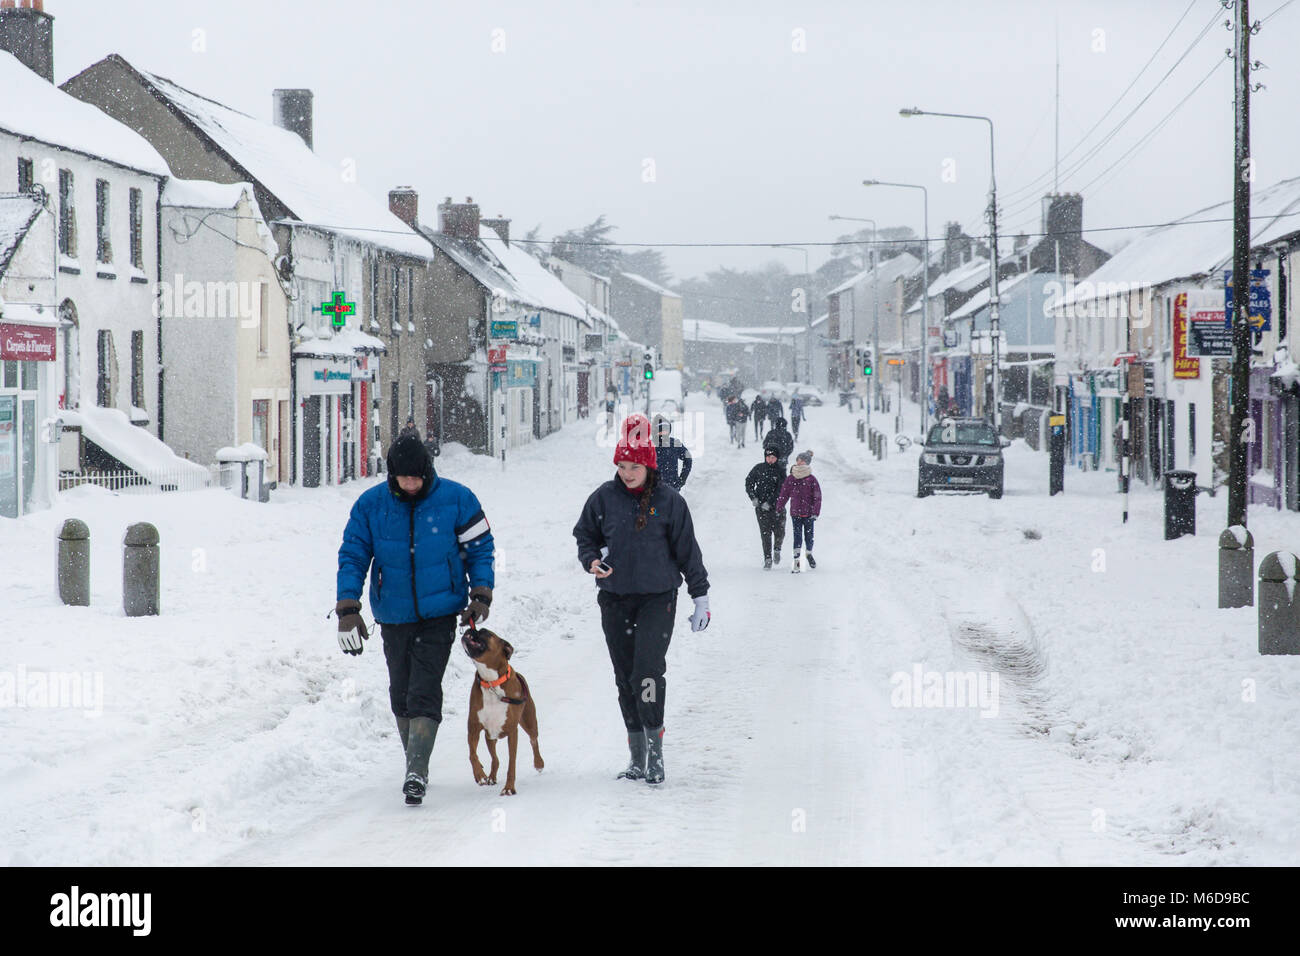 Celbridge, Kildare, Ireland. 02 Mar 2018: Main street in Celbridge covered in snow in the aftermath of the cold wave bugged "The Beast from The East" followed by Storm Emma. People out walking on the covered in snow road in Celbridge town. Winter scenery. Stock Photo